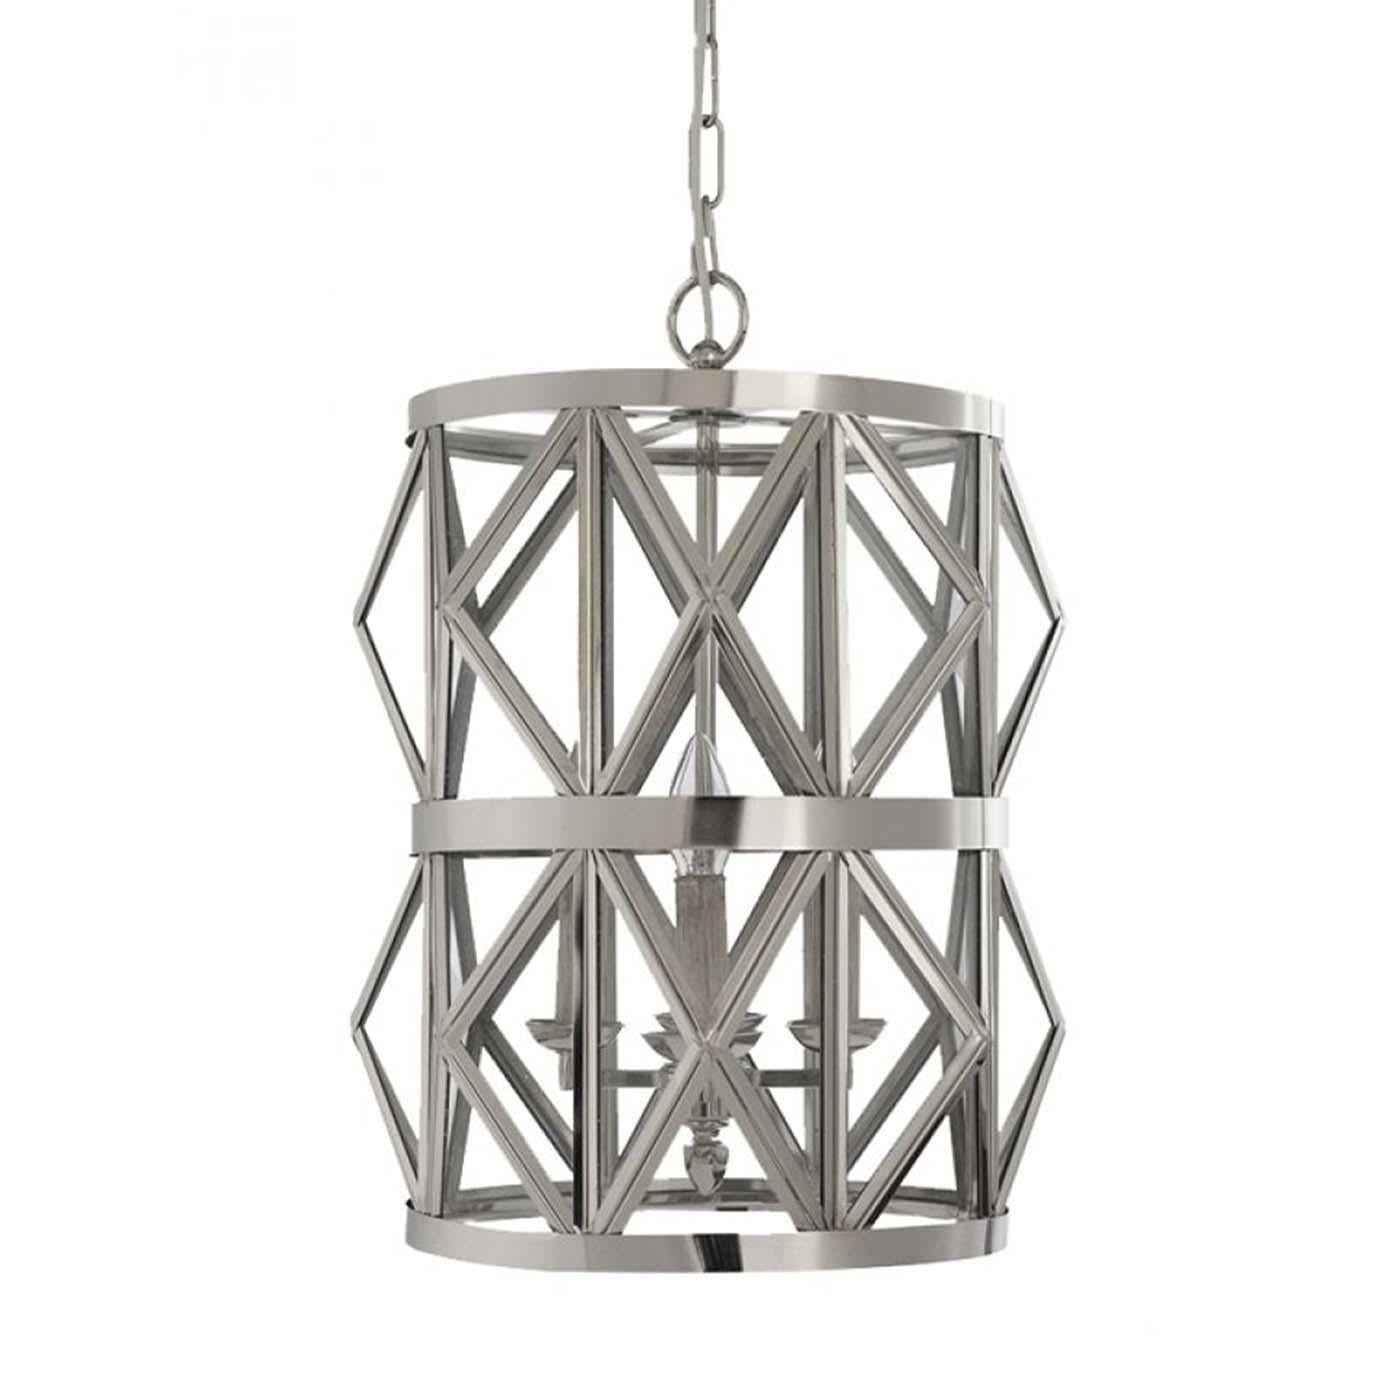 Merging functionality with an artistic design, this pendant features a brass structure that, like an origami, bends in geometric shapes and sharp angles. The light is perfectly distributed through the geometric shapes and creates a delightful